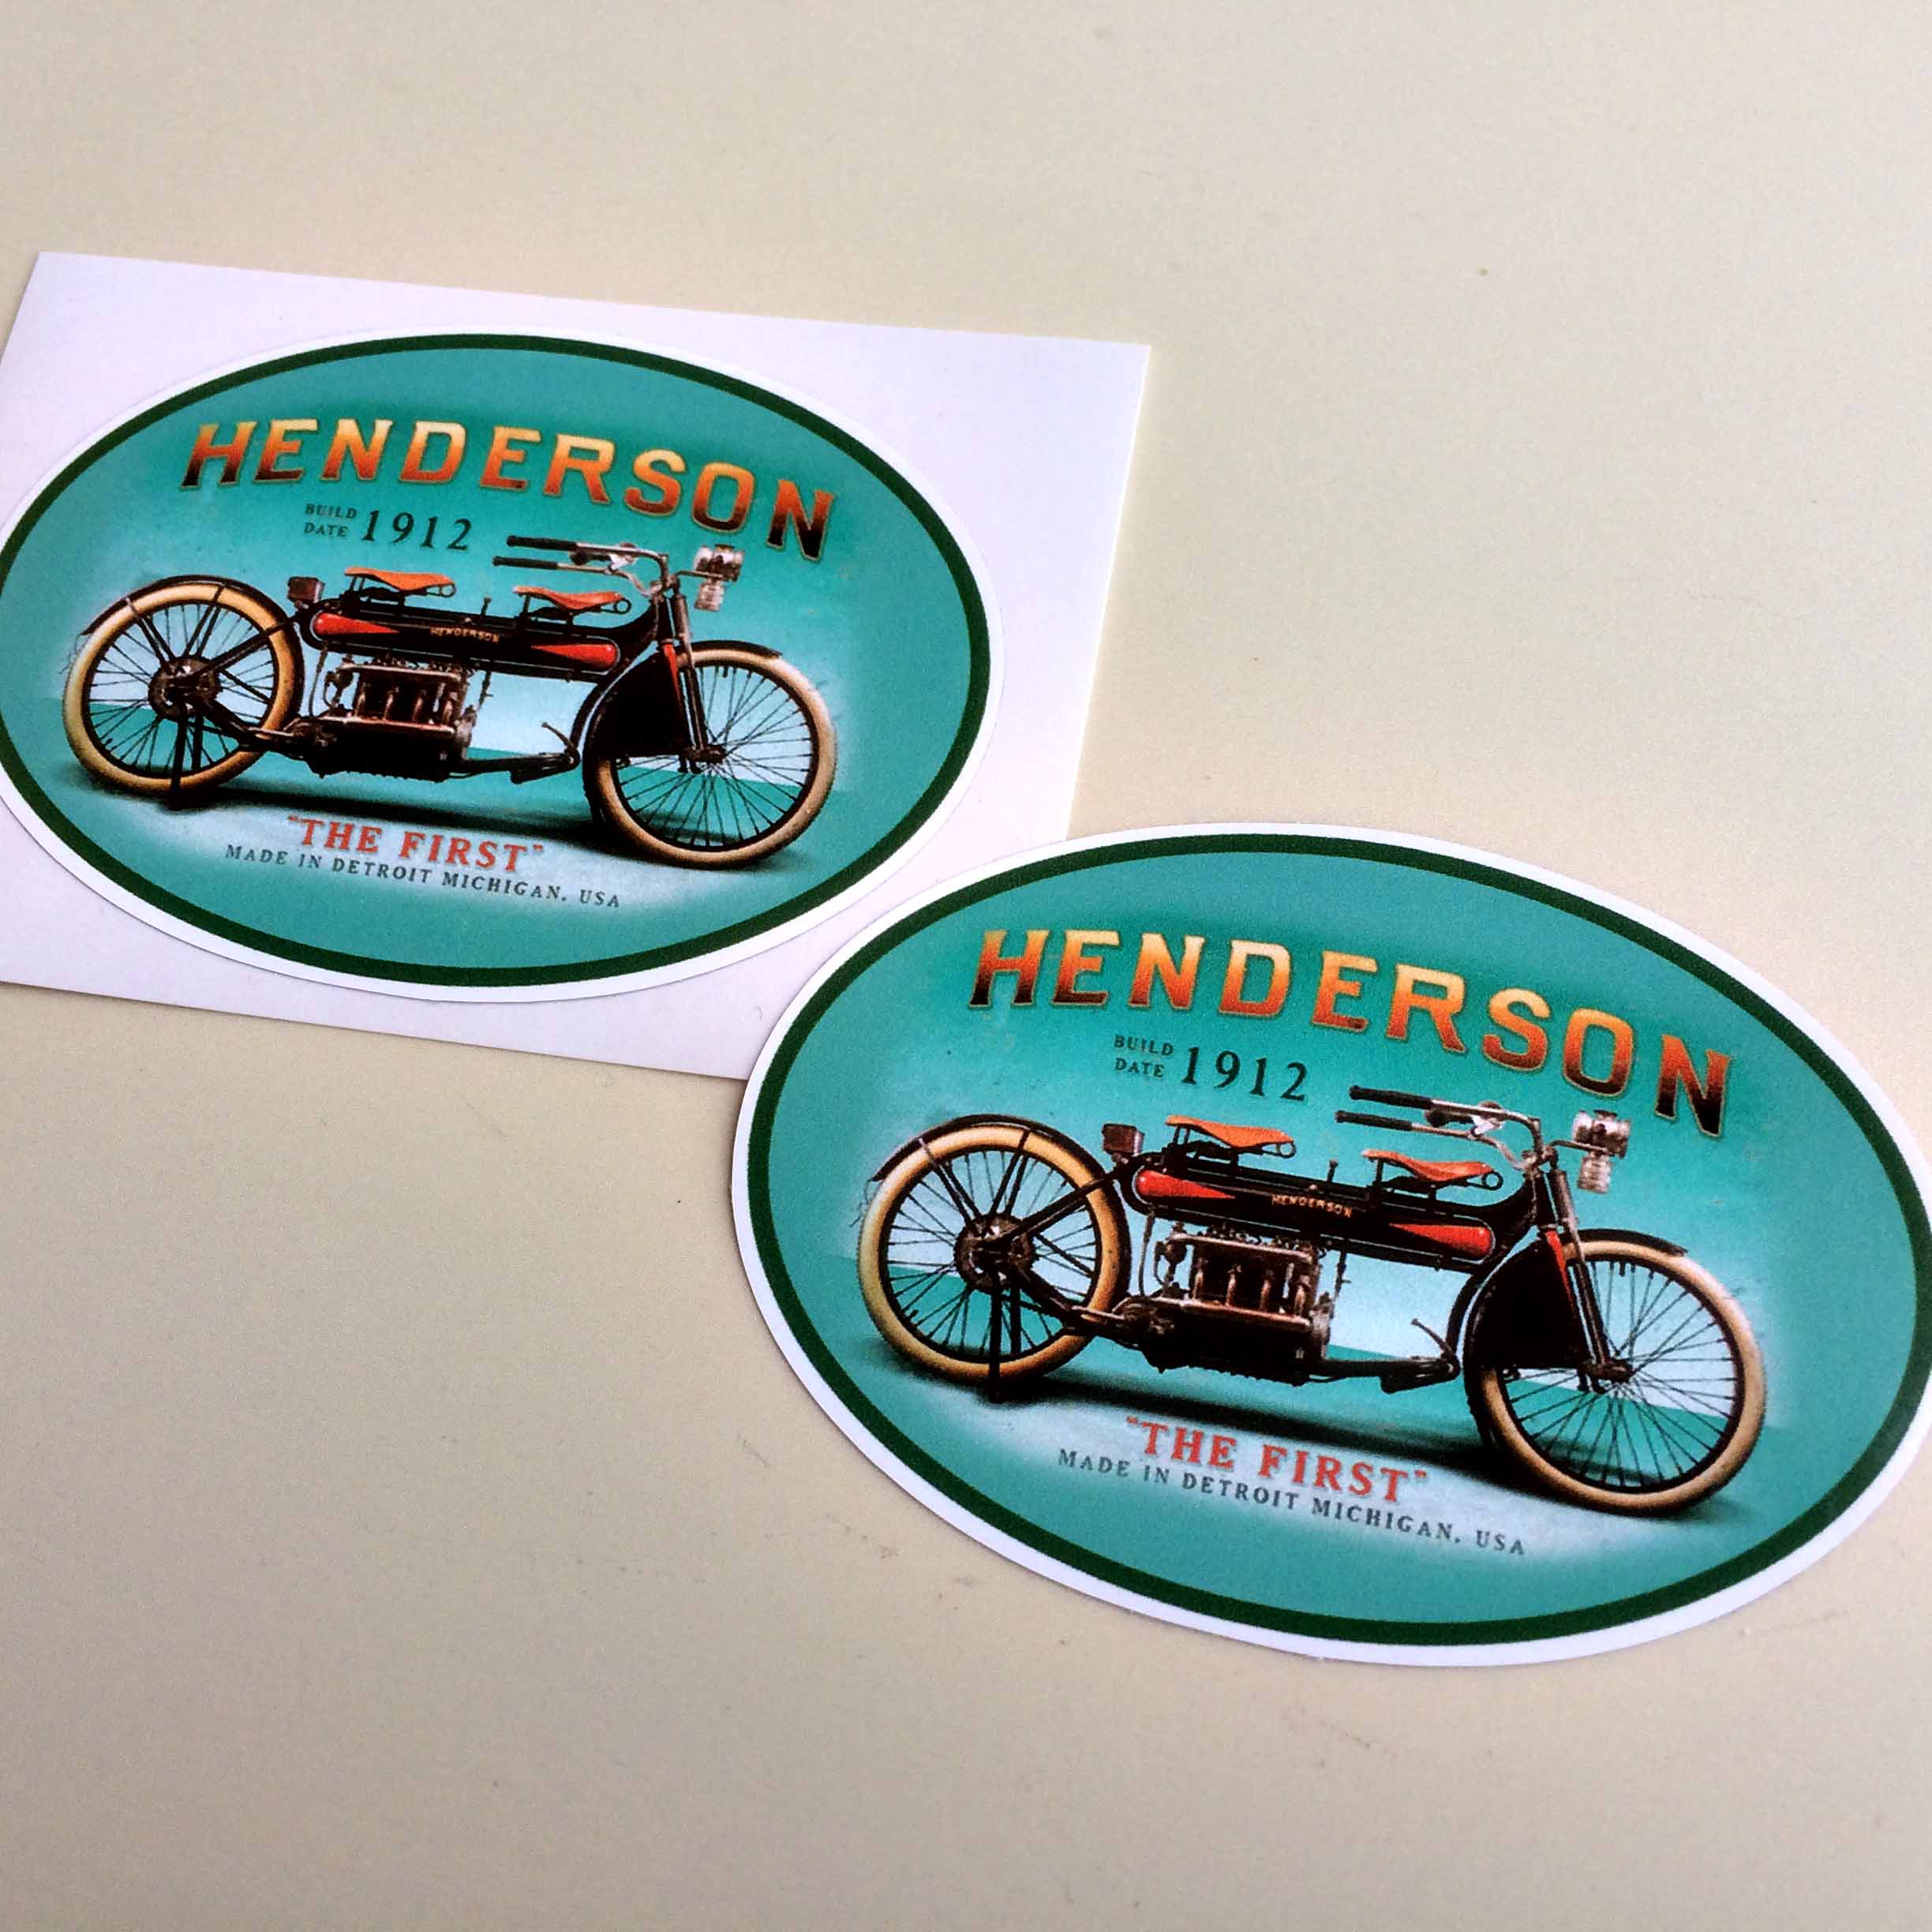 HENDERSON VINTAGE MOTORCYCLE STICKERS. Henderson in gold and "The First" in red lettering surrounds a vintage motorcycle on a blue oval sticker. Additional text in black - Build Date 1912, Made in Detroit, Michigan, USA.